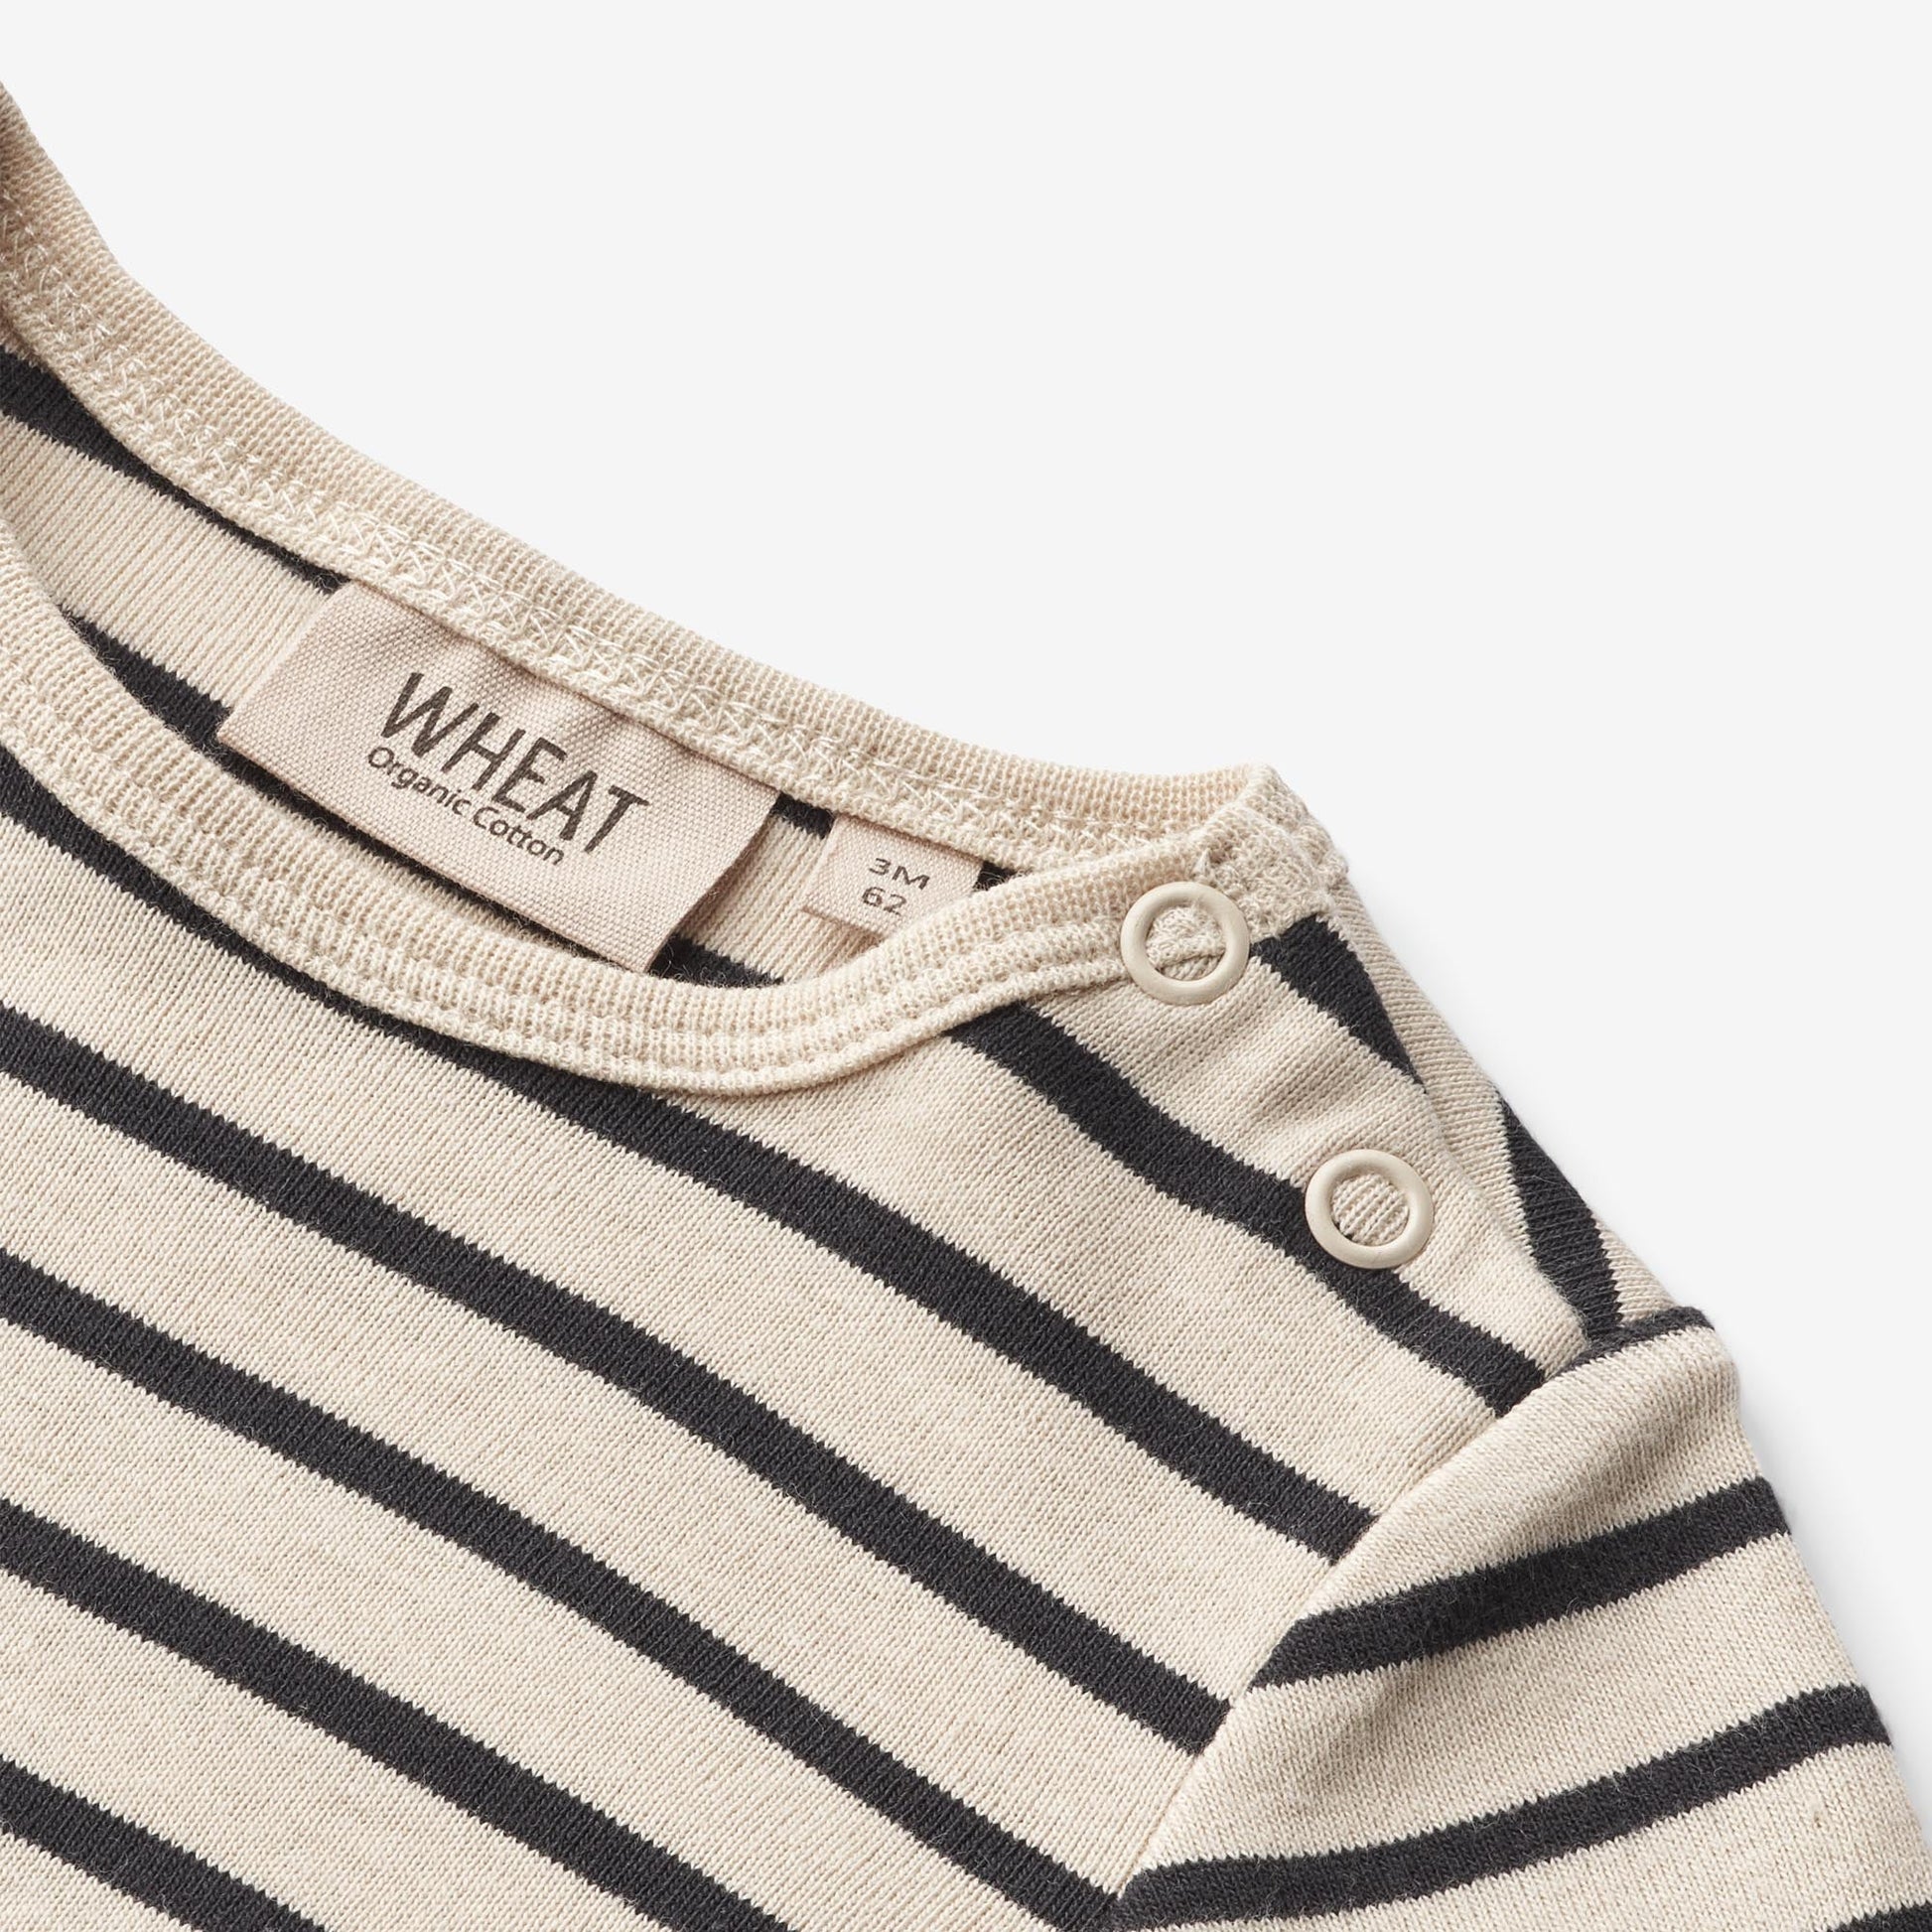 Wheat 'Theis' L/S Baby Jumpsuit - Navy Stripe